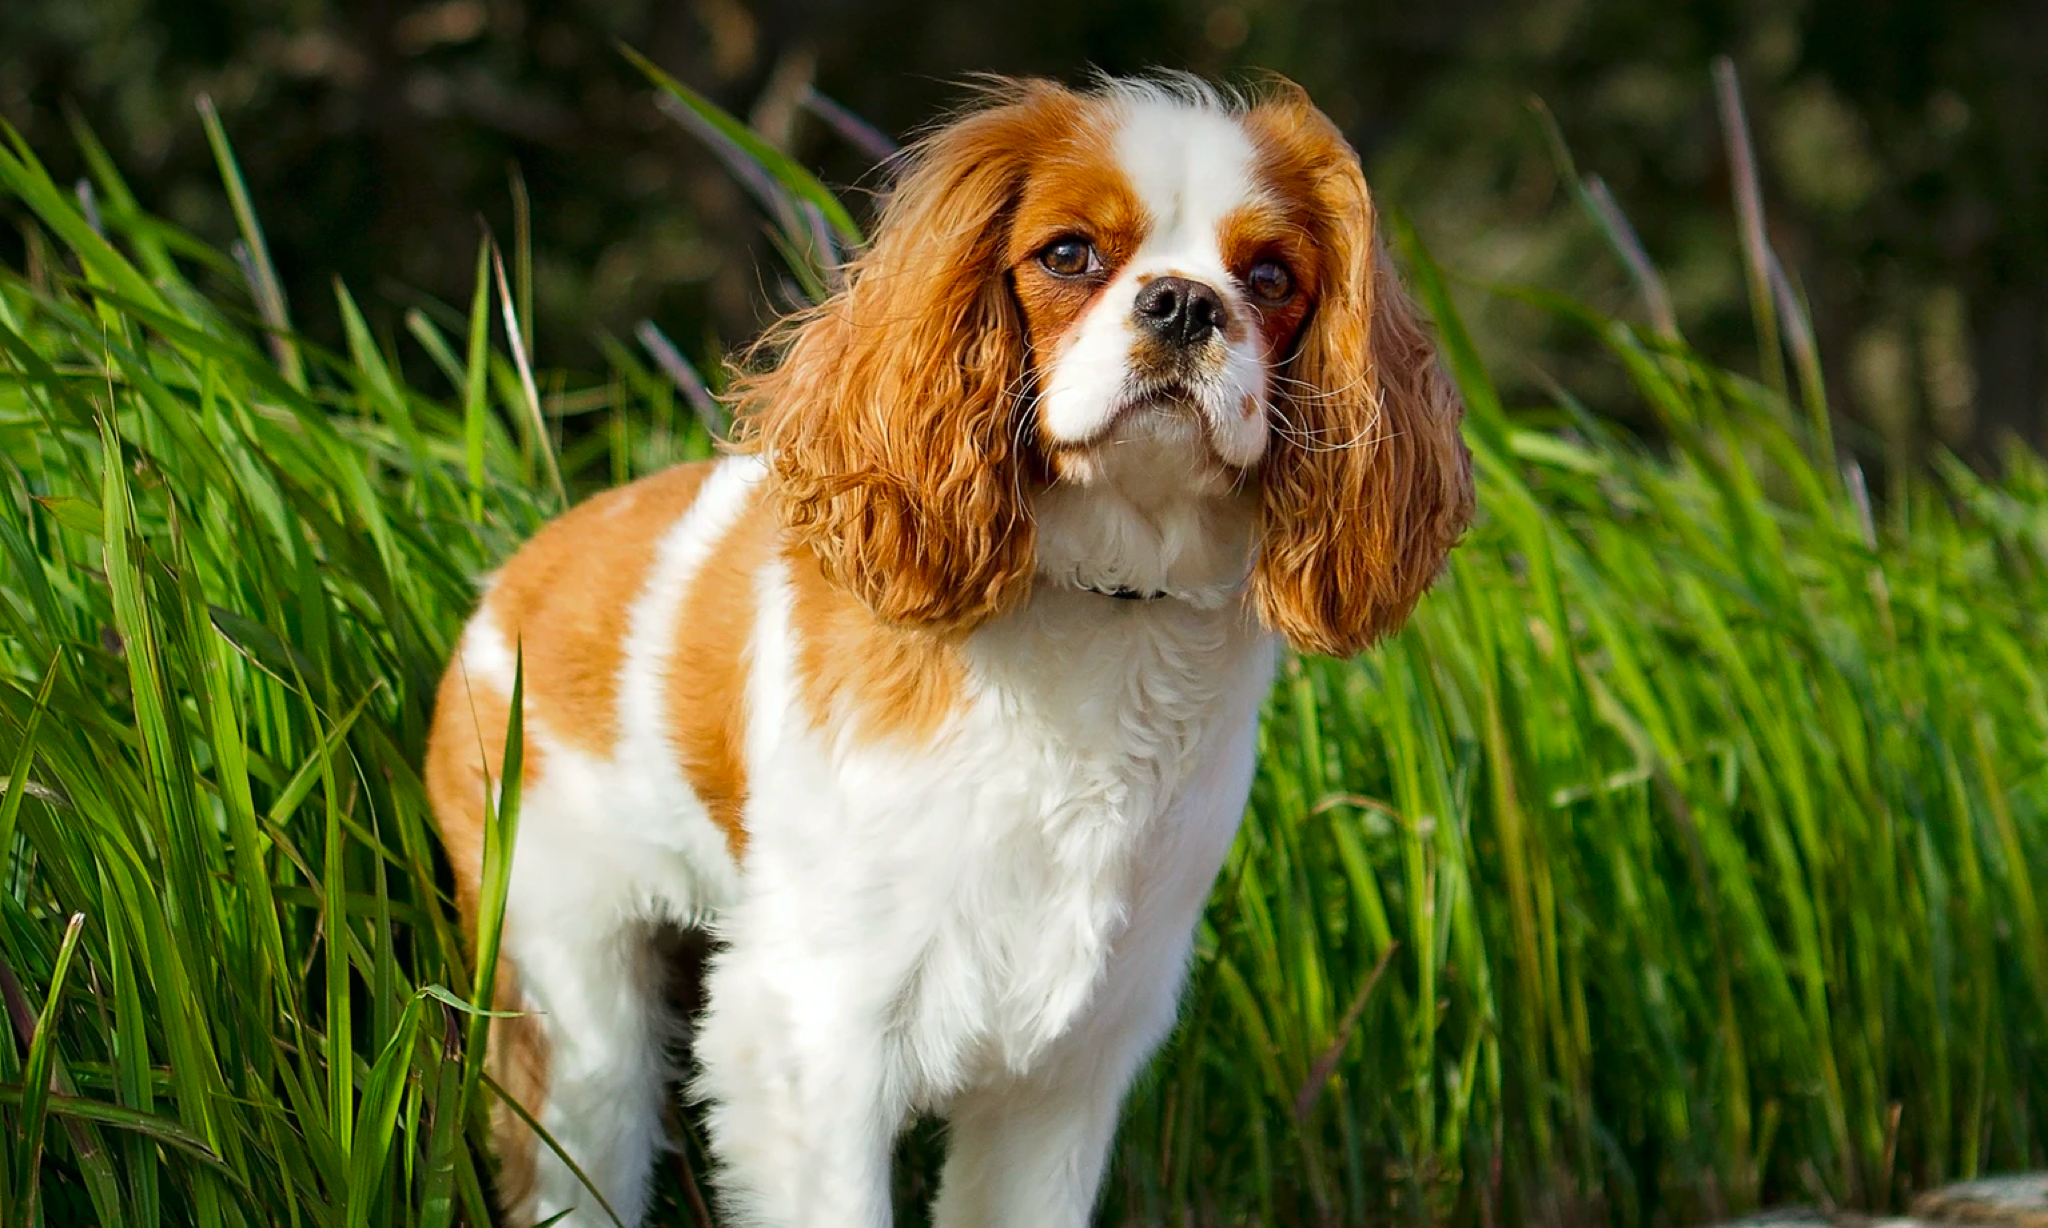 A King Charles Cavalier looks on from a grassy ledge